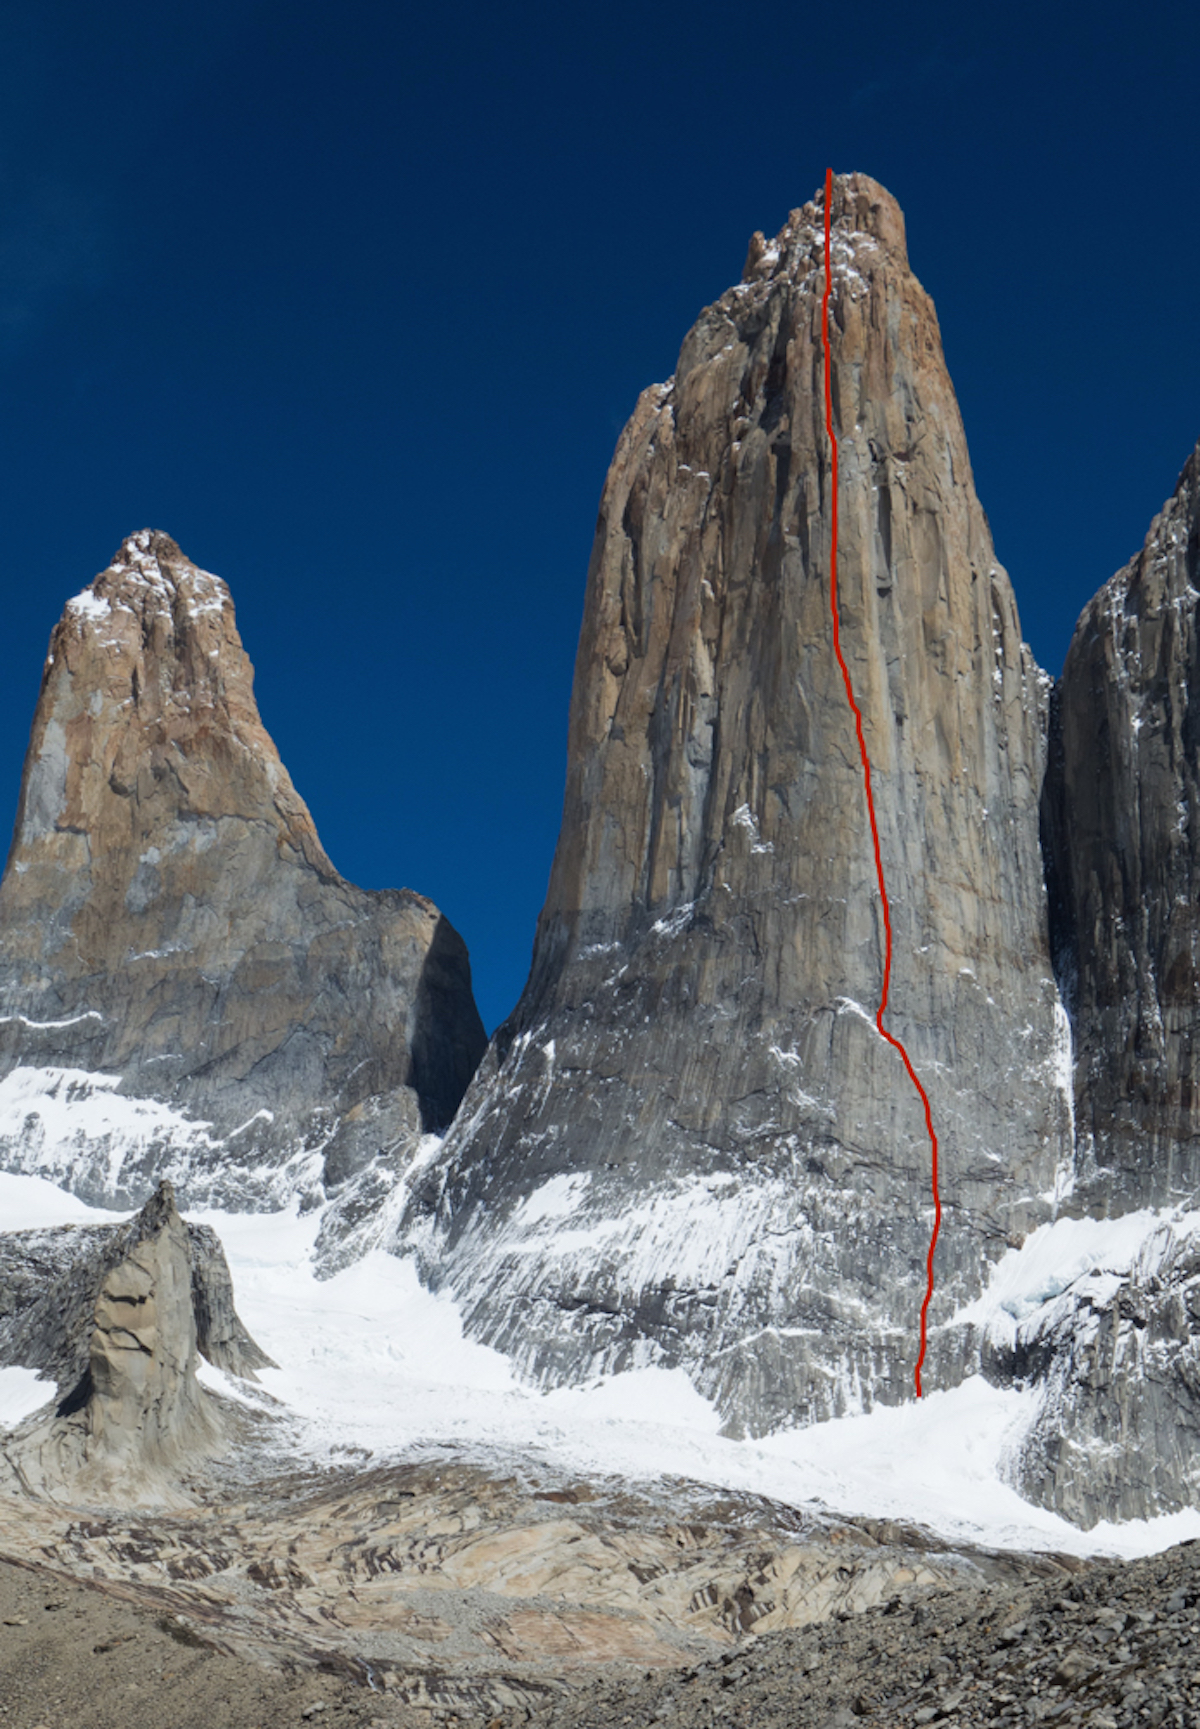 El Regalo de Mwono on the Central Tower, Torres del Paine, Patagonia (VI 5.13b, 1200m) was first climbed in the early 1990s by Paul Pritchard, Sean Smith, Noel Craine and Simon Yates and rated VI 5.10 A4. [Photo] Courtesy of Nico Favresse, Siebe Vanhee and Sean Villanueva O'Driscoll